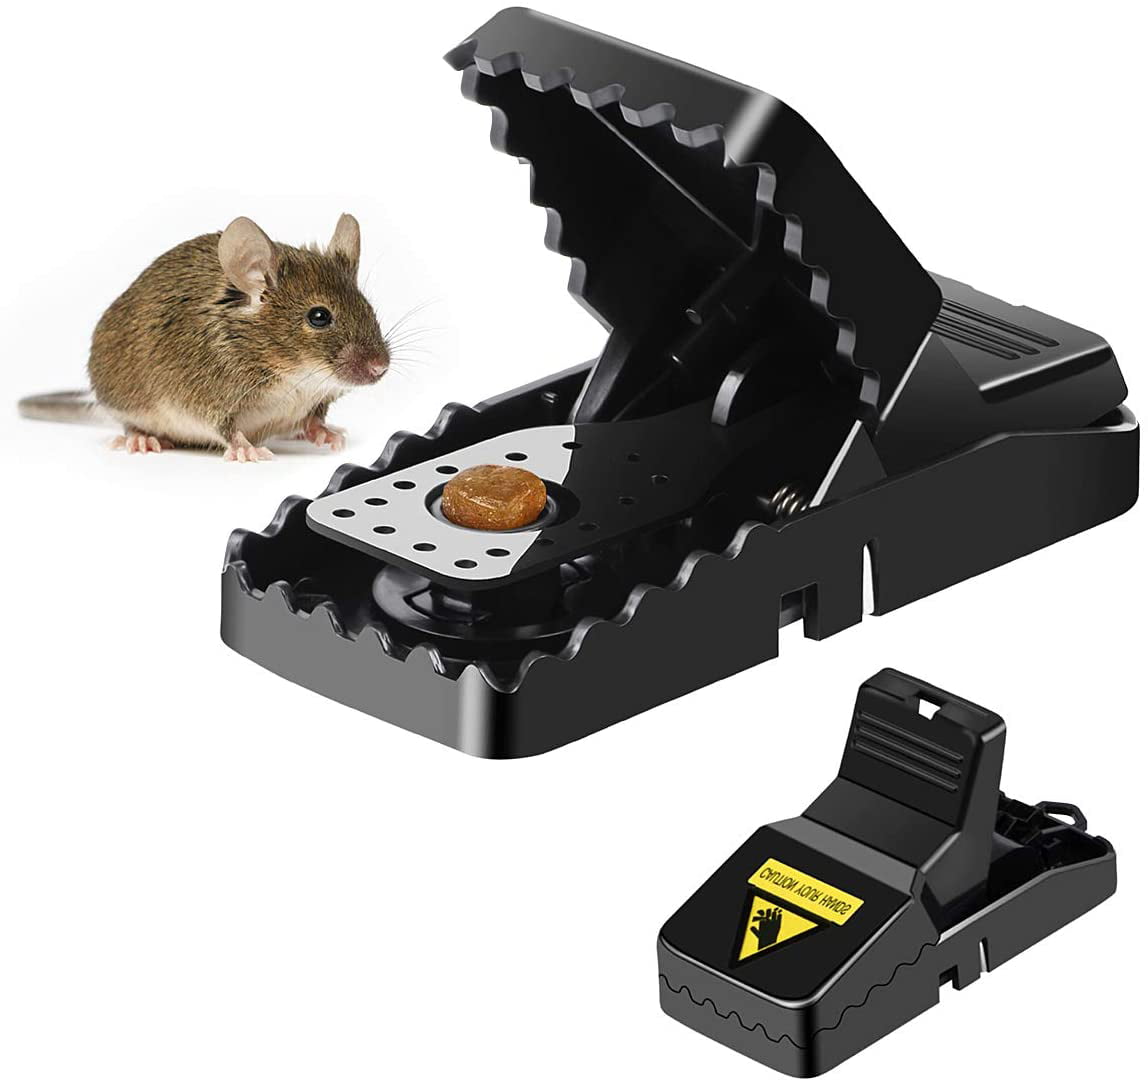 6 x Traps Mouse Rat Hunting STRONG Snap Catch Trap Pest Control Survival Camping 